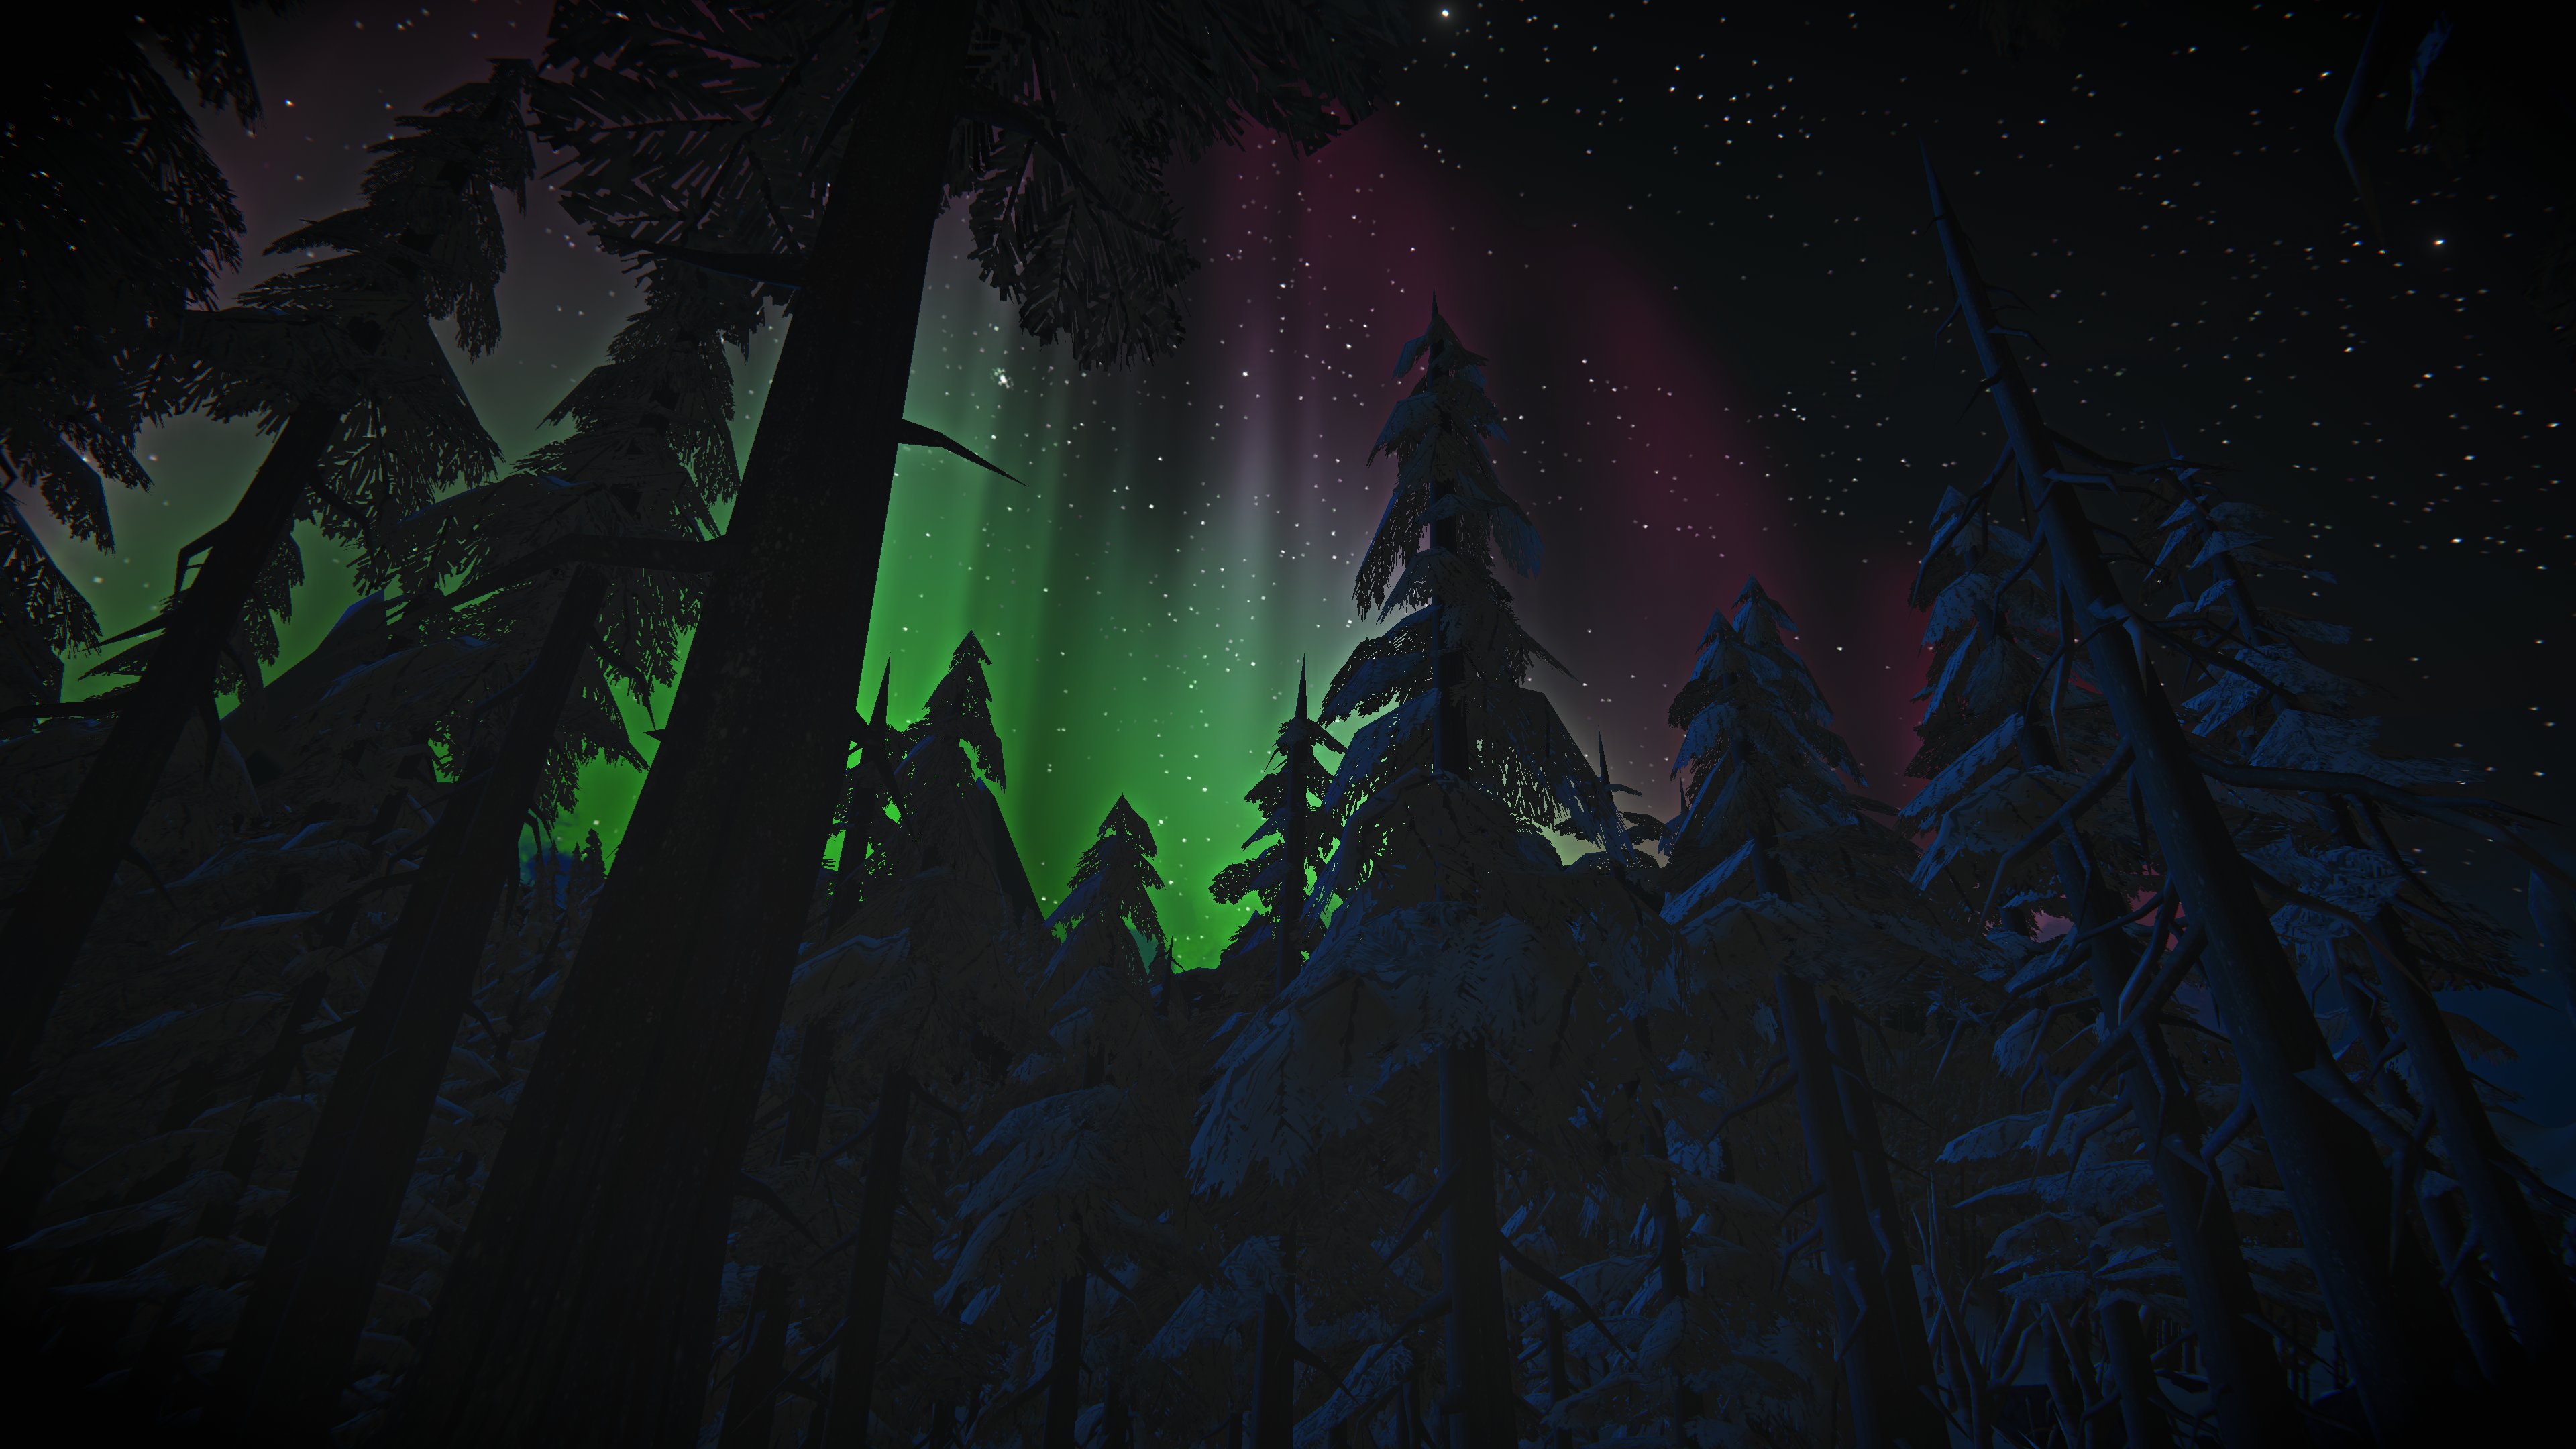 Looking up at the green and purple aurora borealis amid tall tress in a forest.